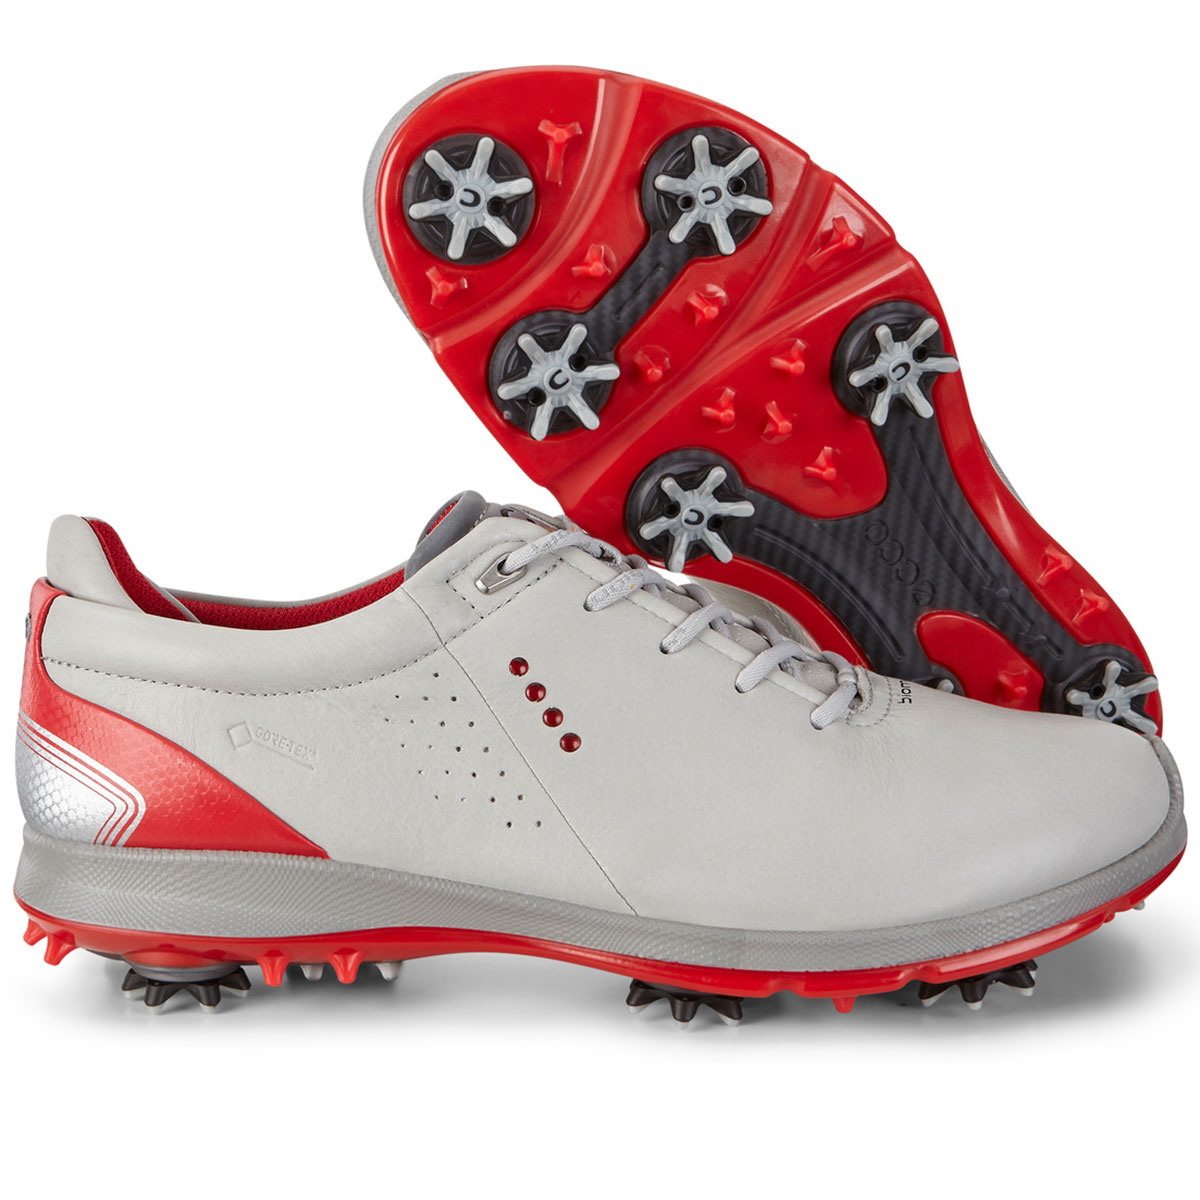 ECCO Men's Biom G2 Spiked Golf Shoes from golf